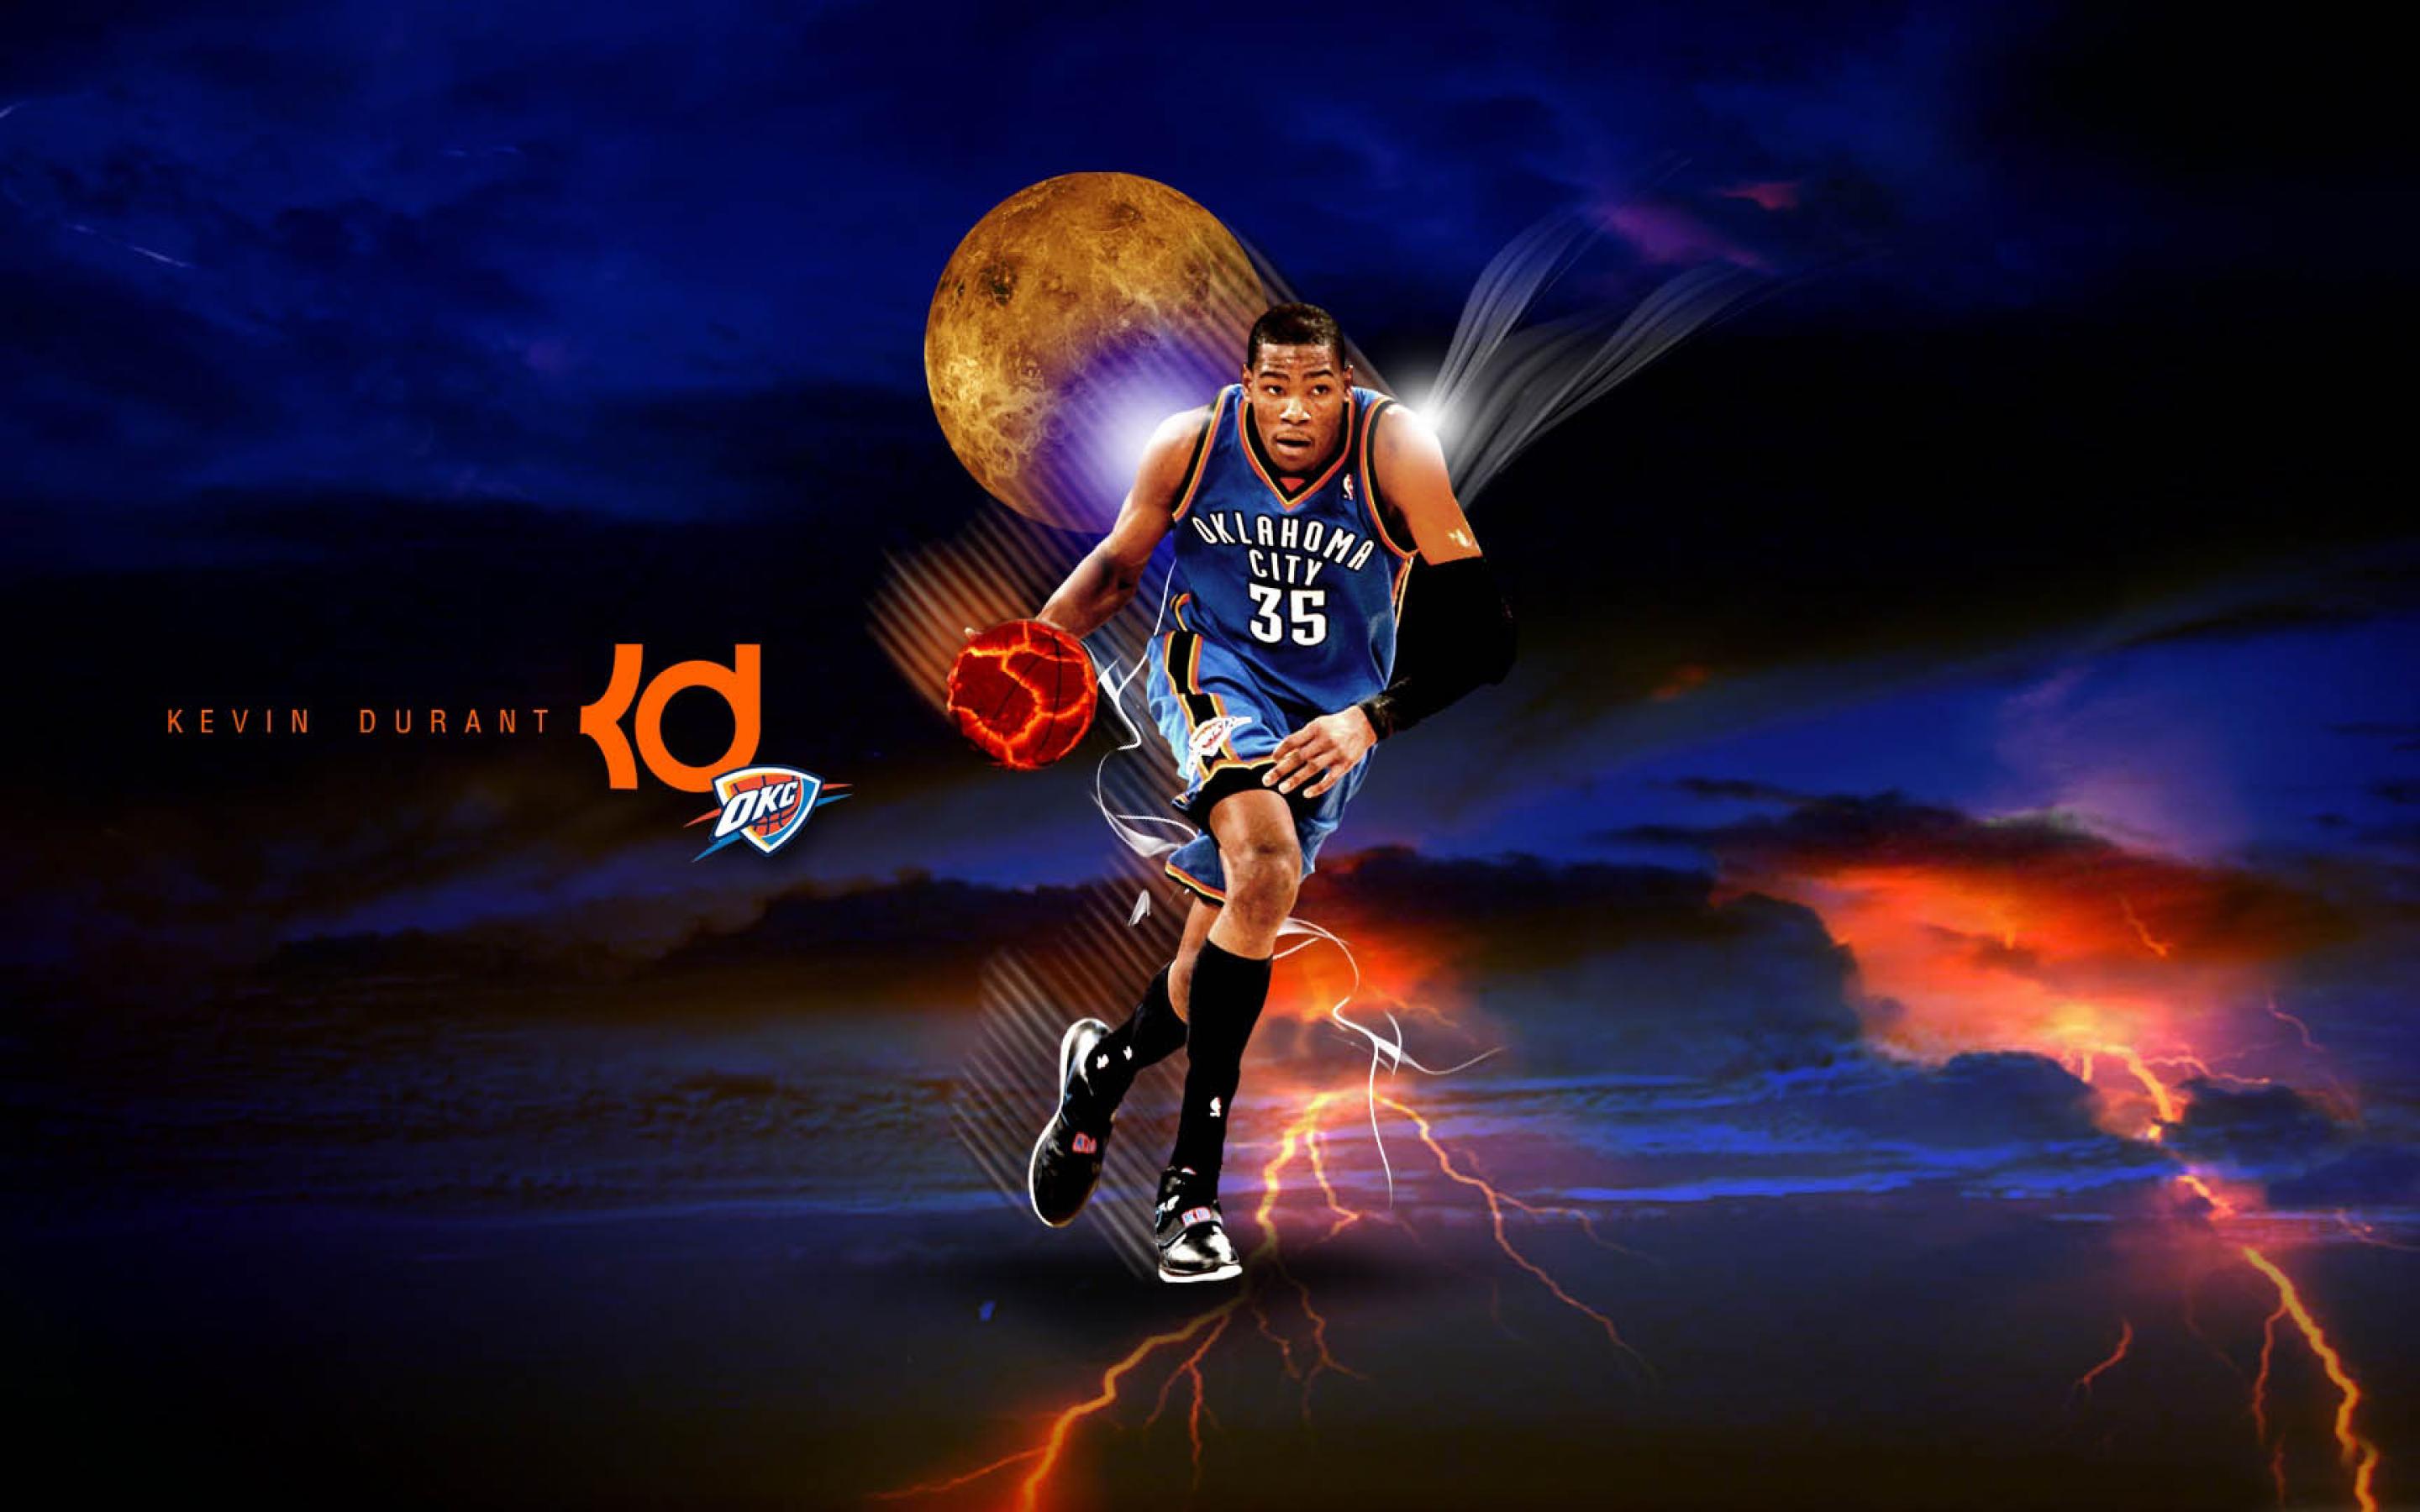 Wallpapers Source - Kevin Durant Wallpaper 3d , HD Wallpaper & Backgrounds